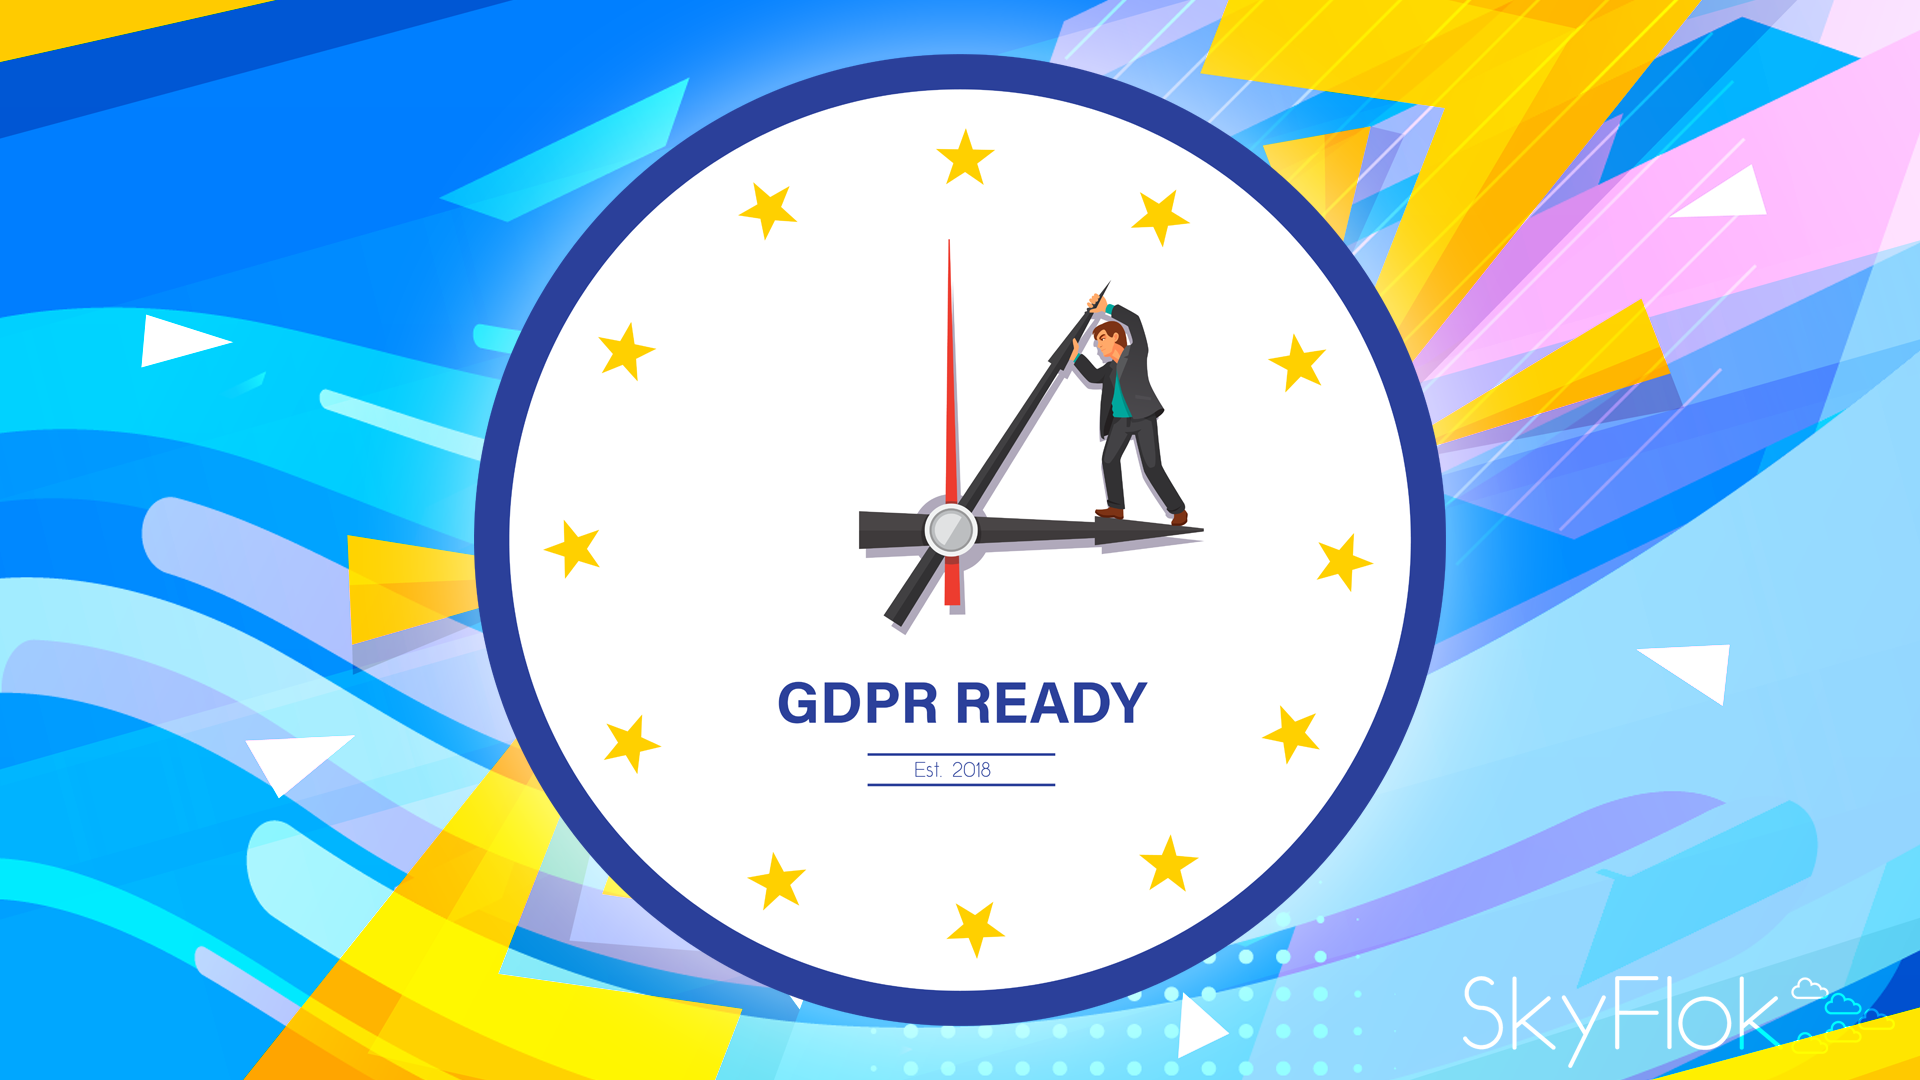 76% of US Organizations Are Concerned About Meeting the GDPR requirements